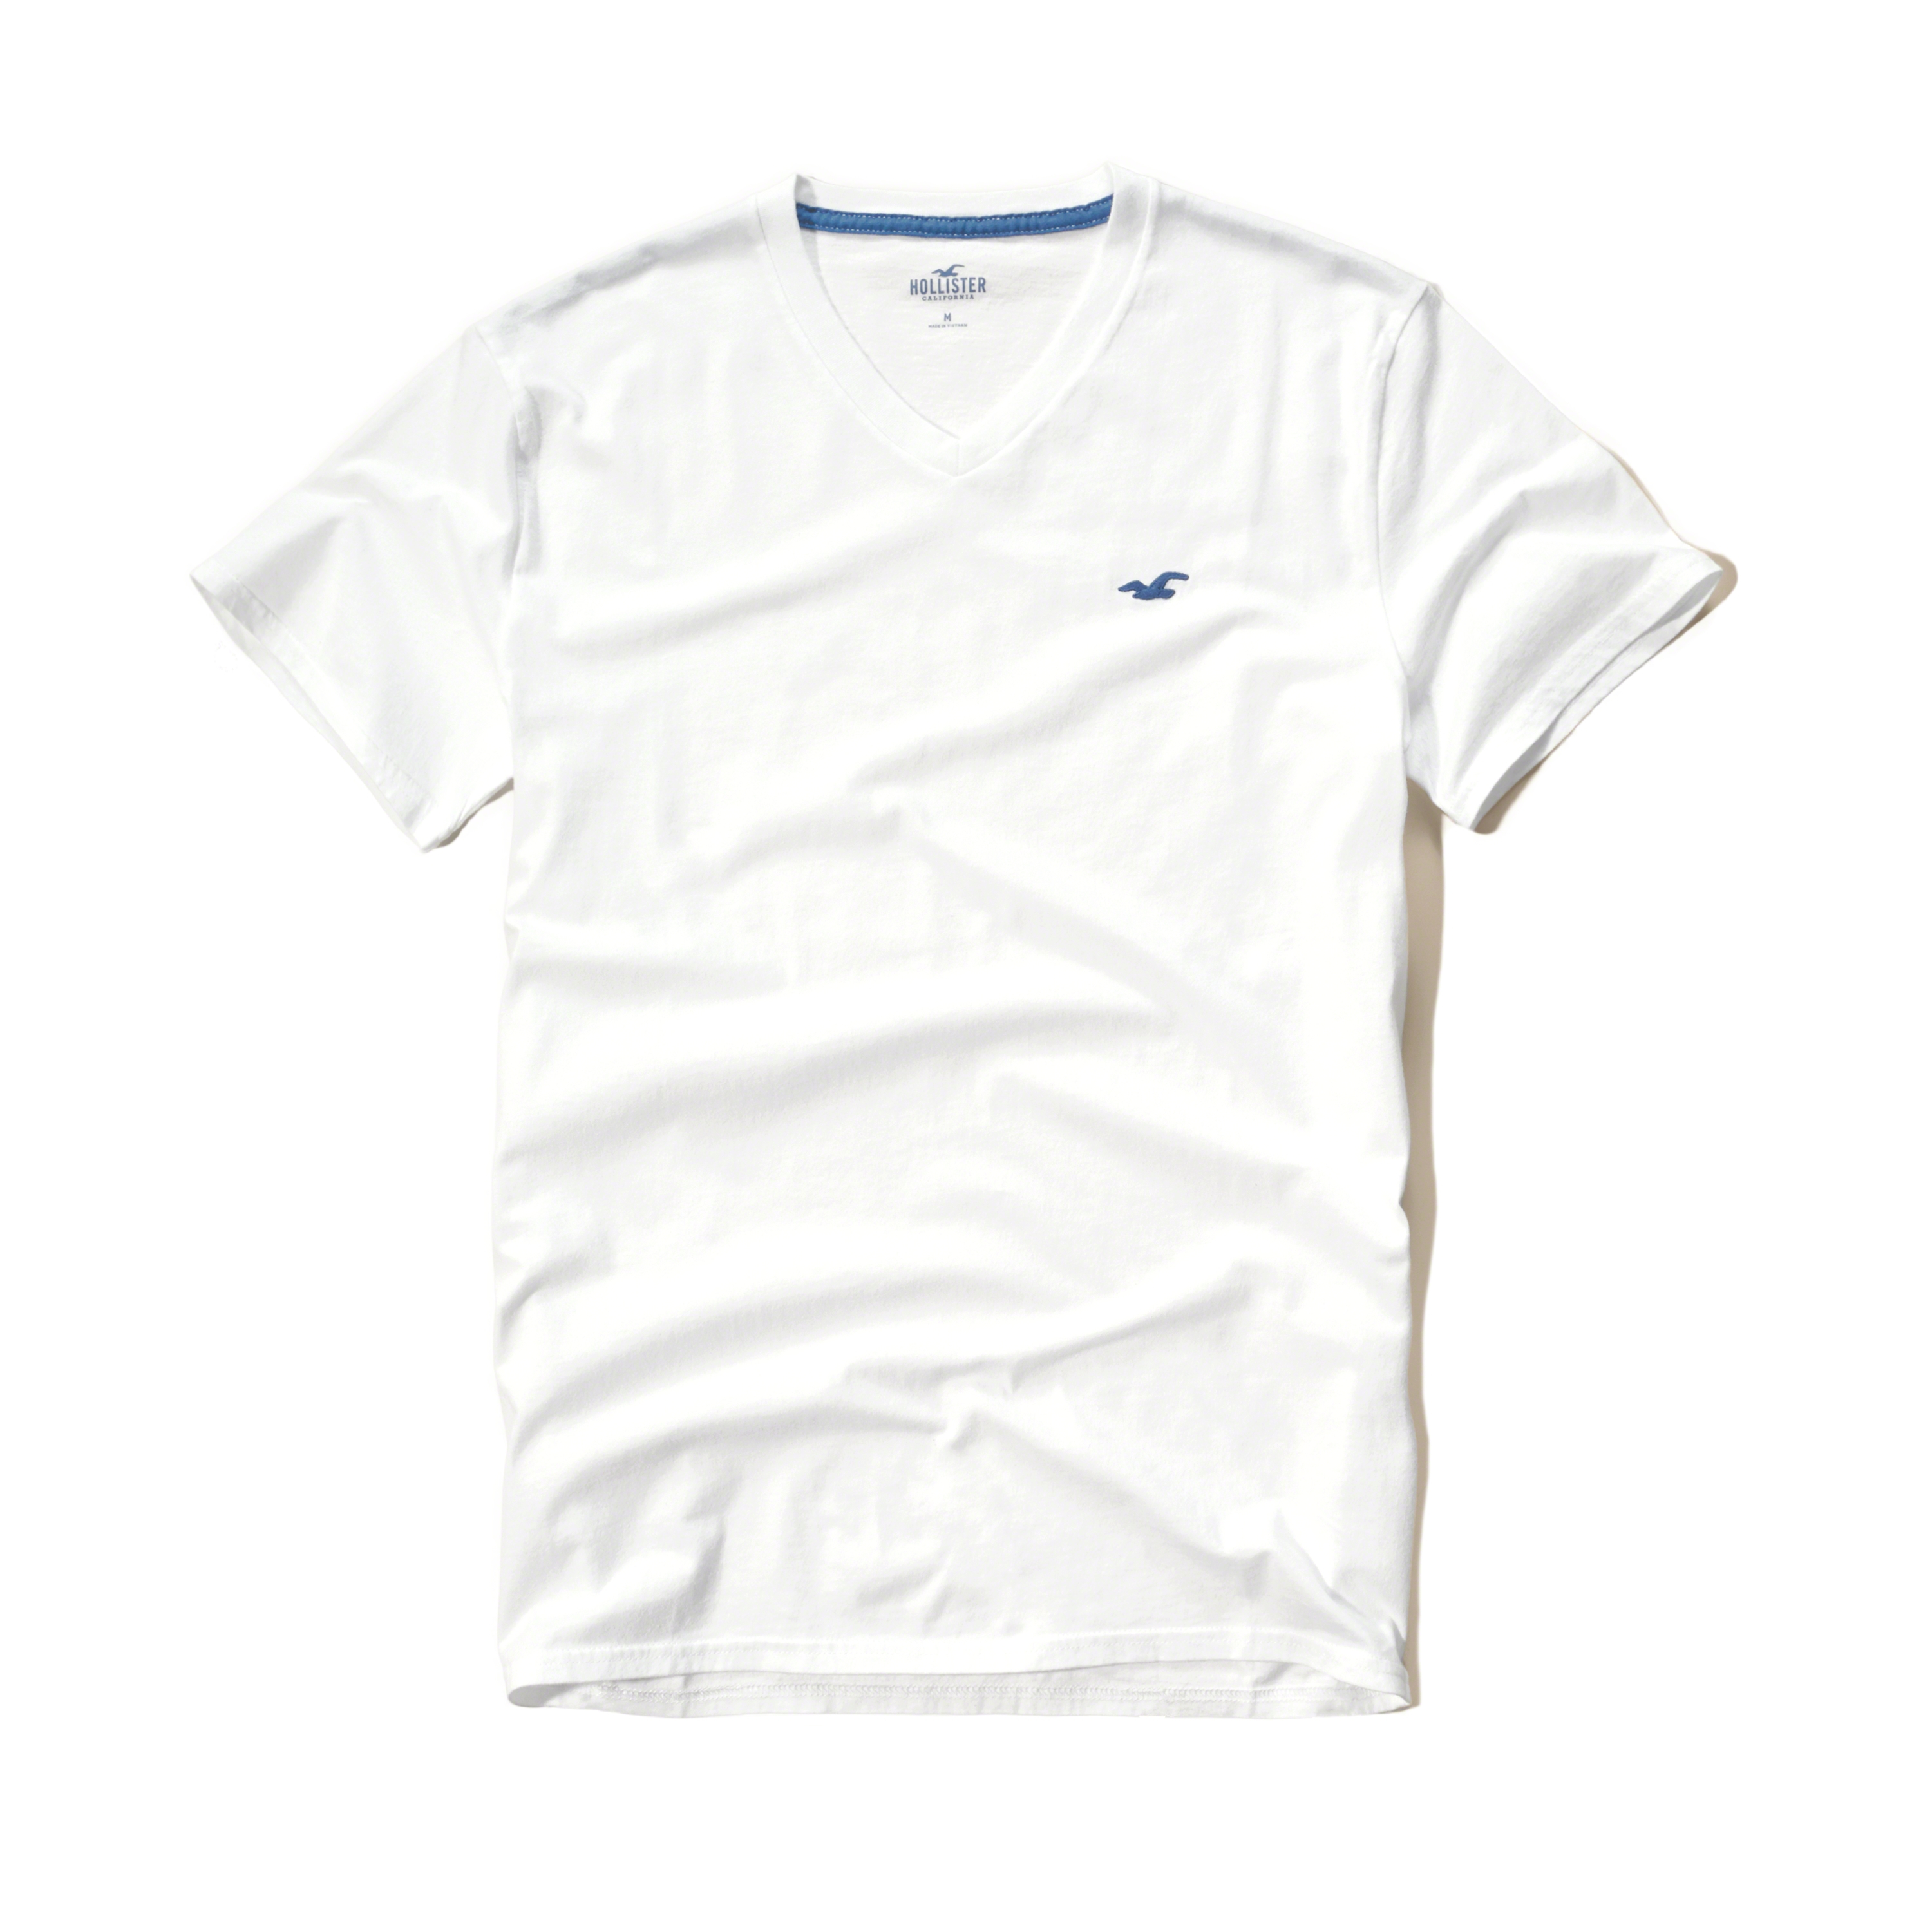 Party hollister white t shirt mens amazon prime, Long sleeve t shirts for sale, long t shirt with side slits. 